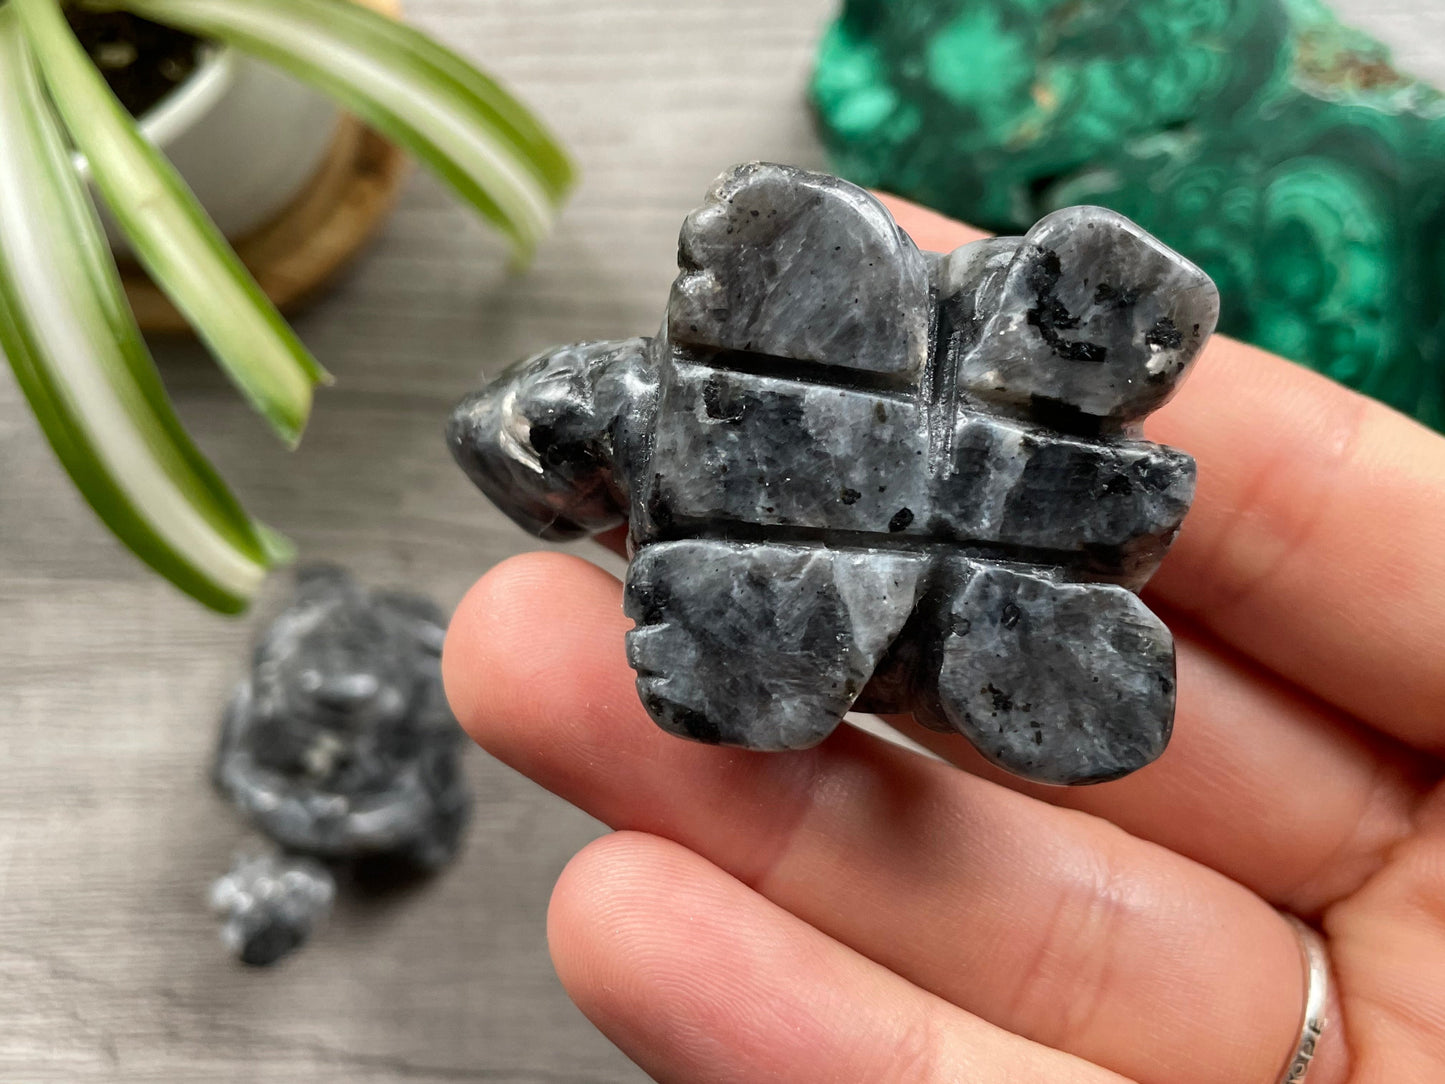 Pictured are turtles carved out of larvikite.